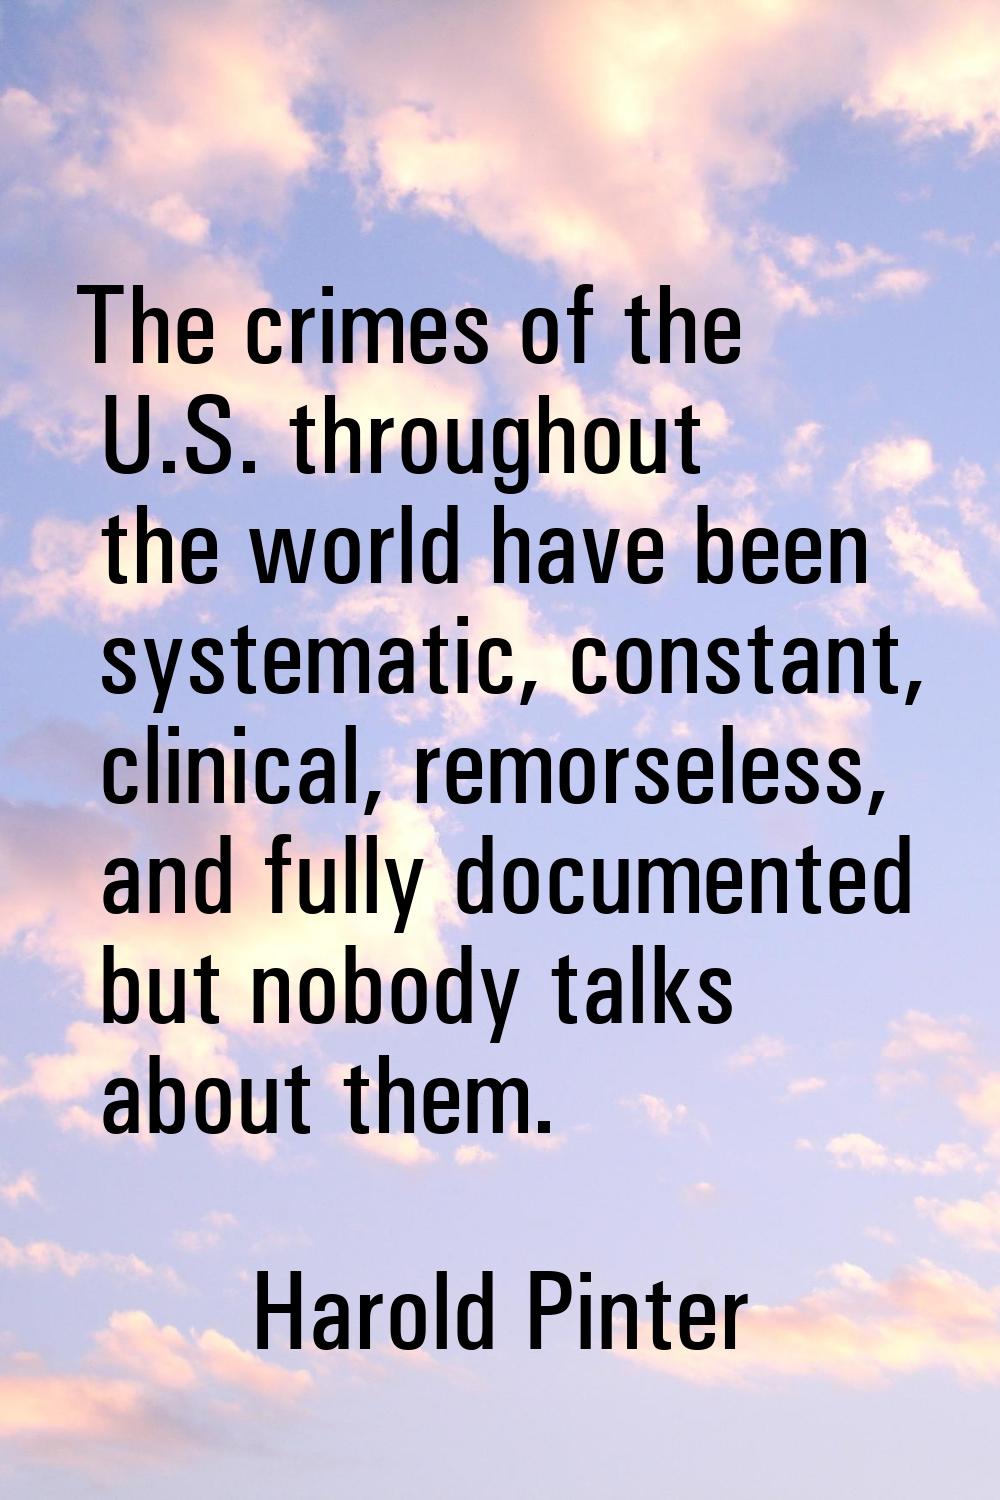 The crimes of the U.S. throughout the world have been systematic, constant, clinical, remorseless, 